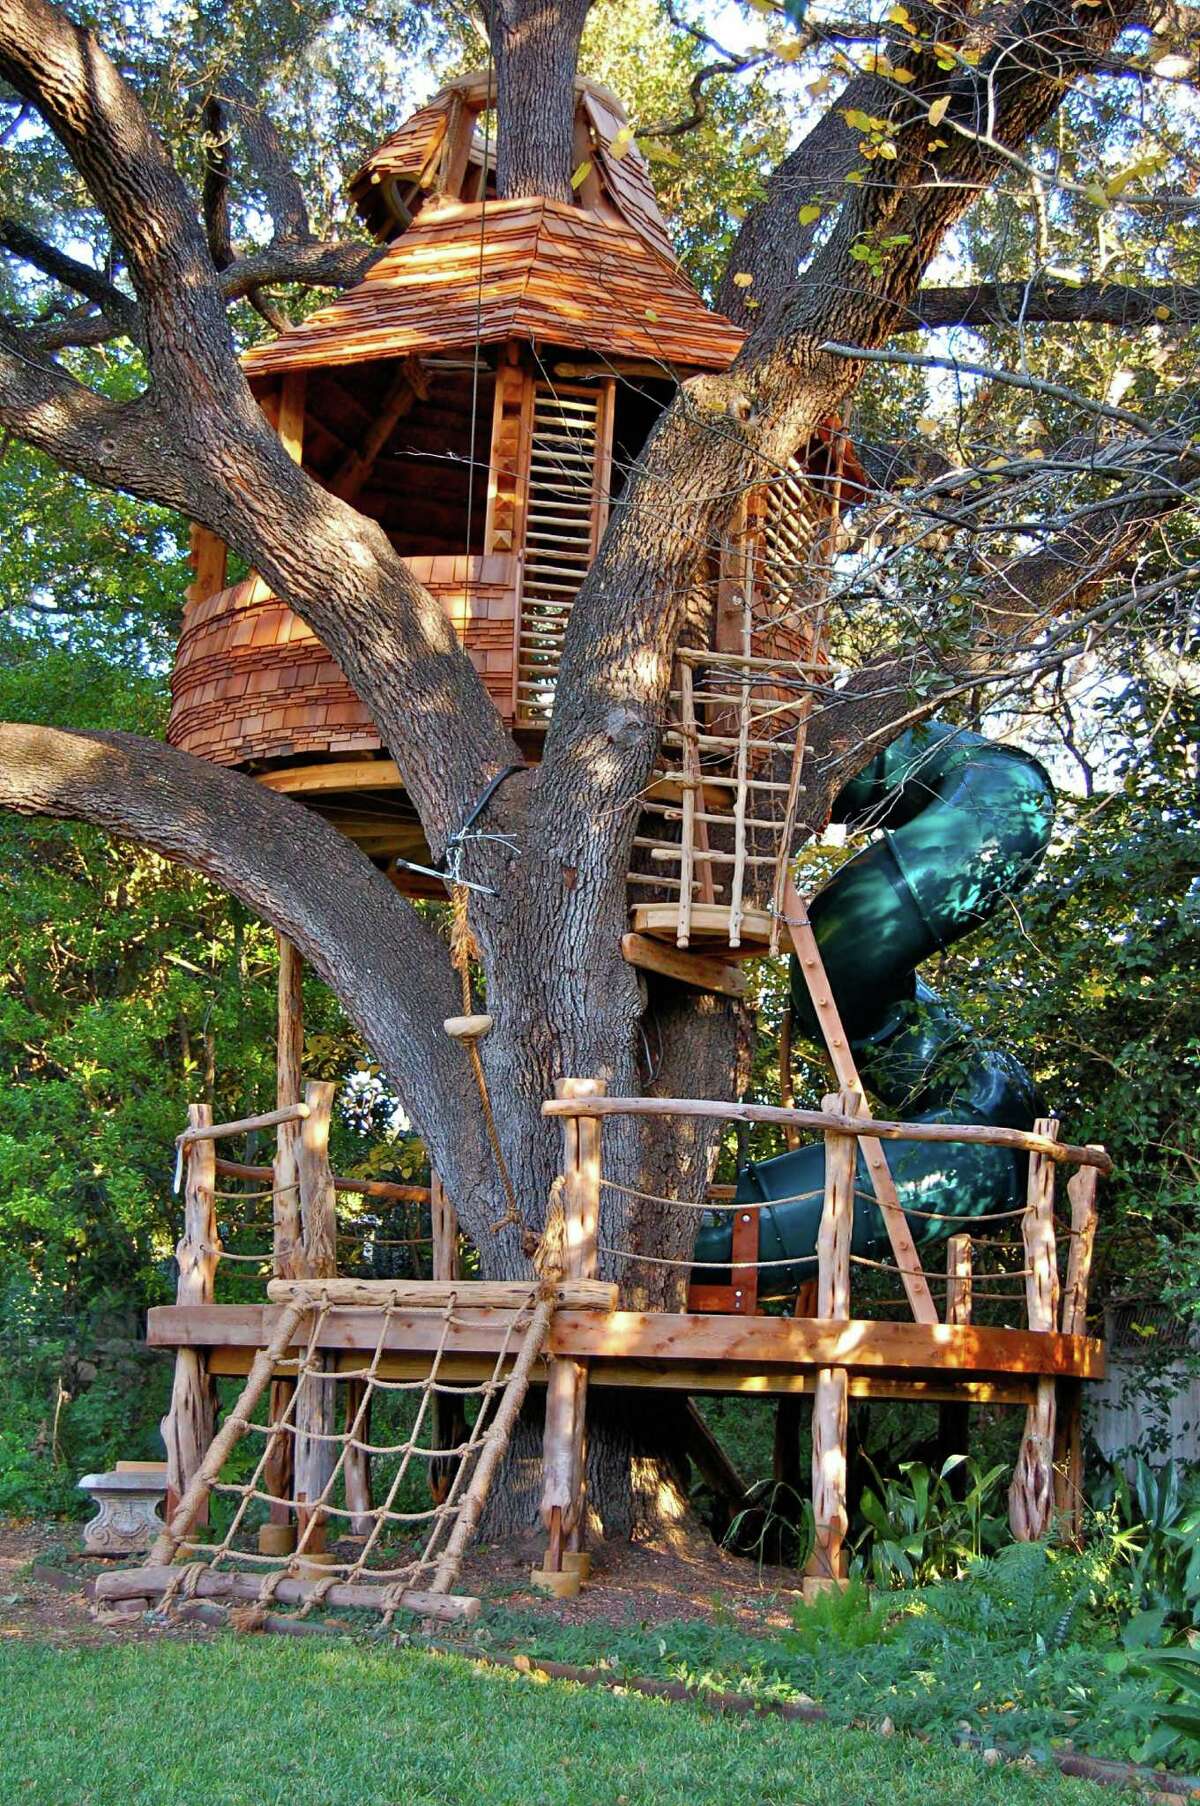 A treehouse with climbing wall, spiral slide and swings wraps around a large live oak in a San Antonio backyard. It is one of two works by Attie Jonker of Azzanarts that will be featured on “Treehouse Masters” on Feb. 27.